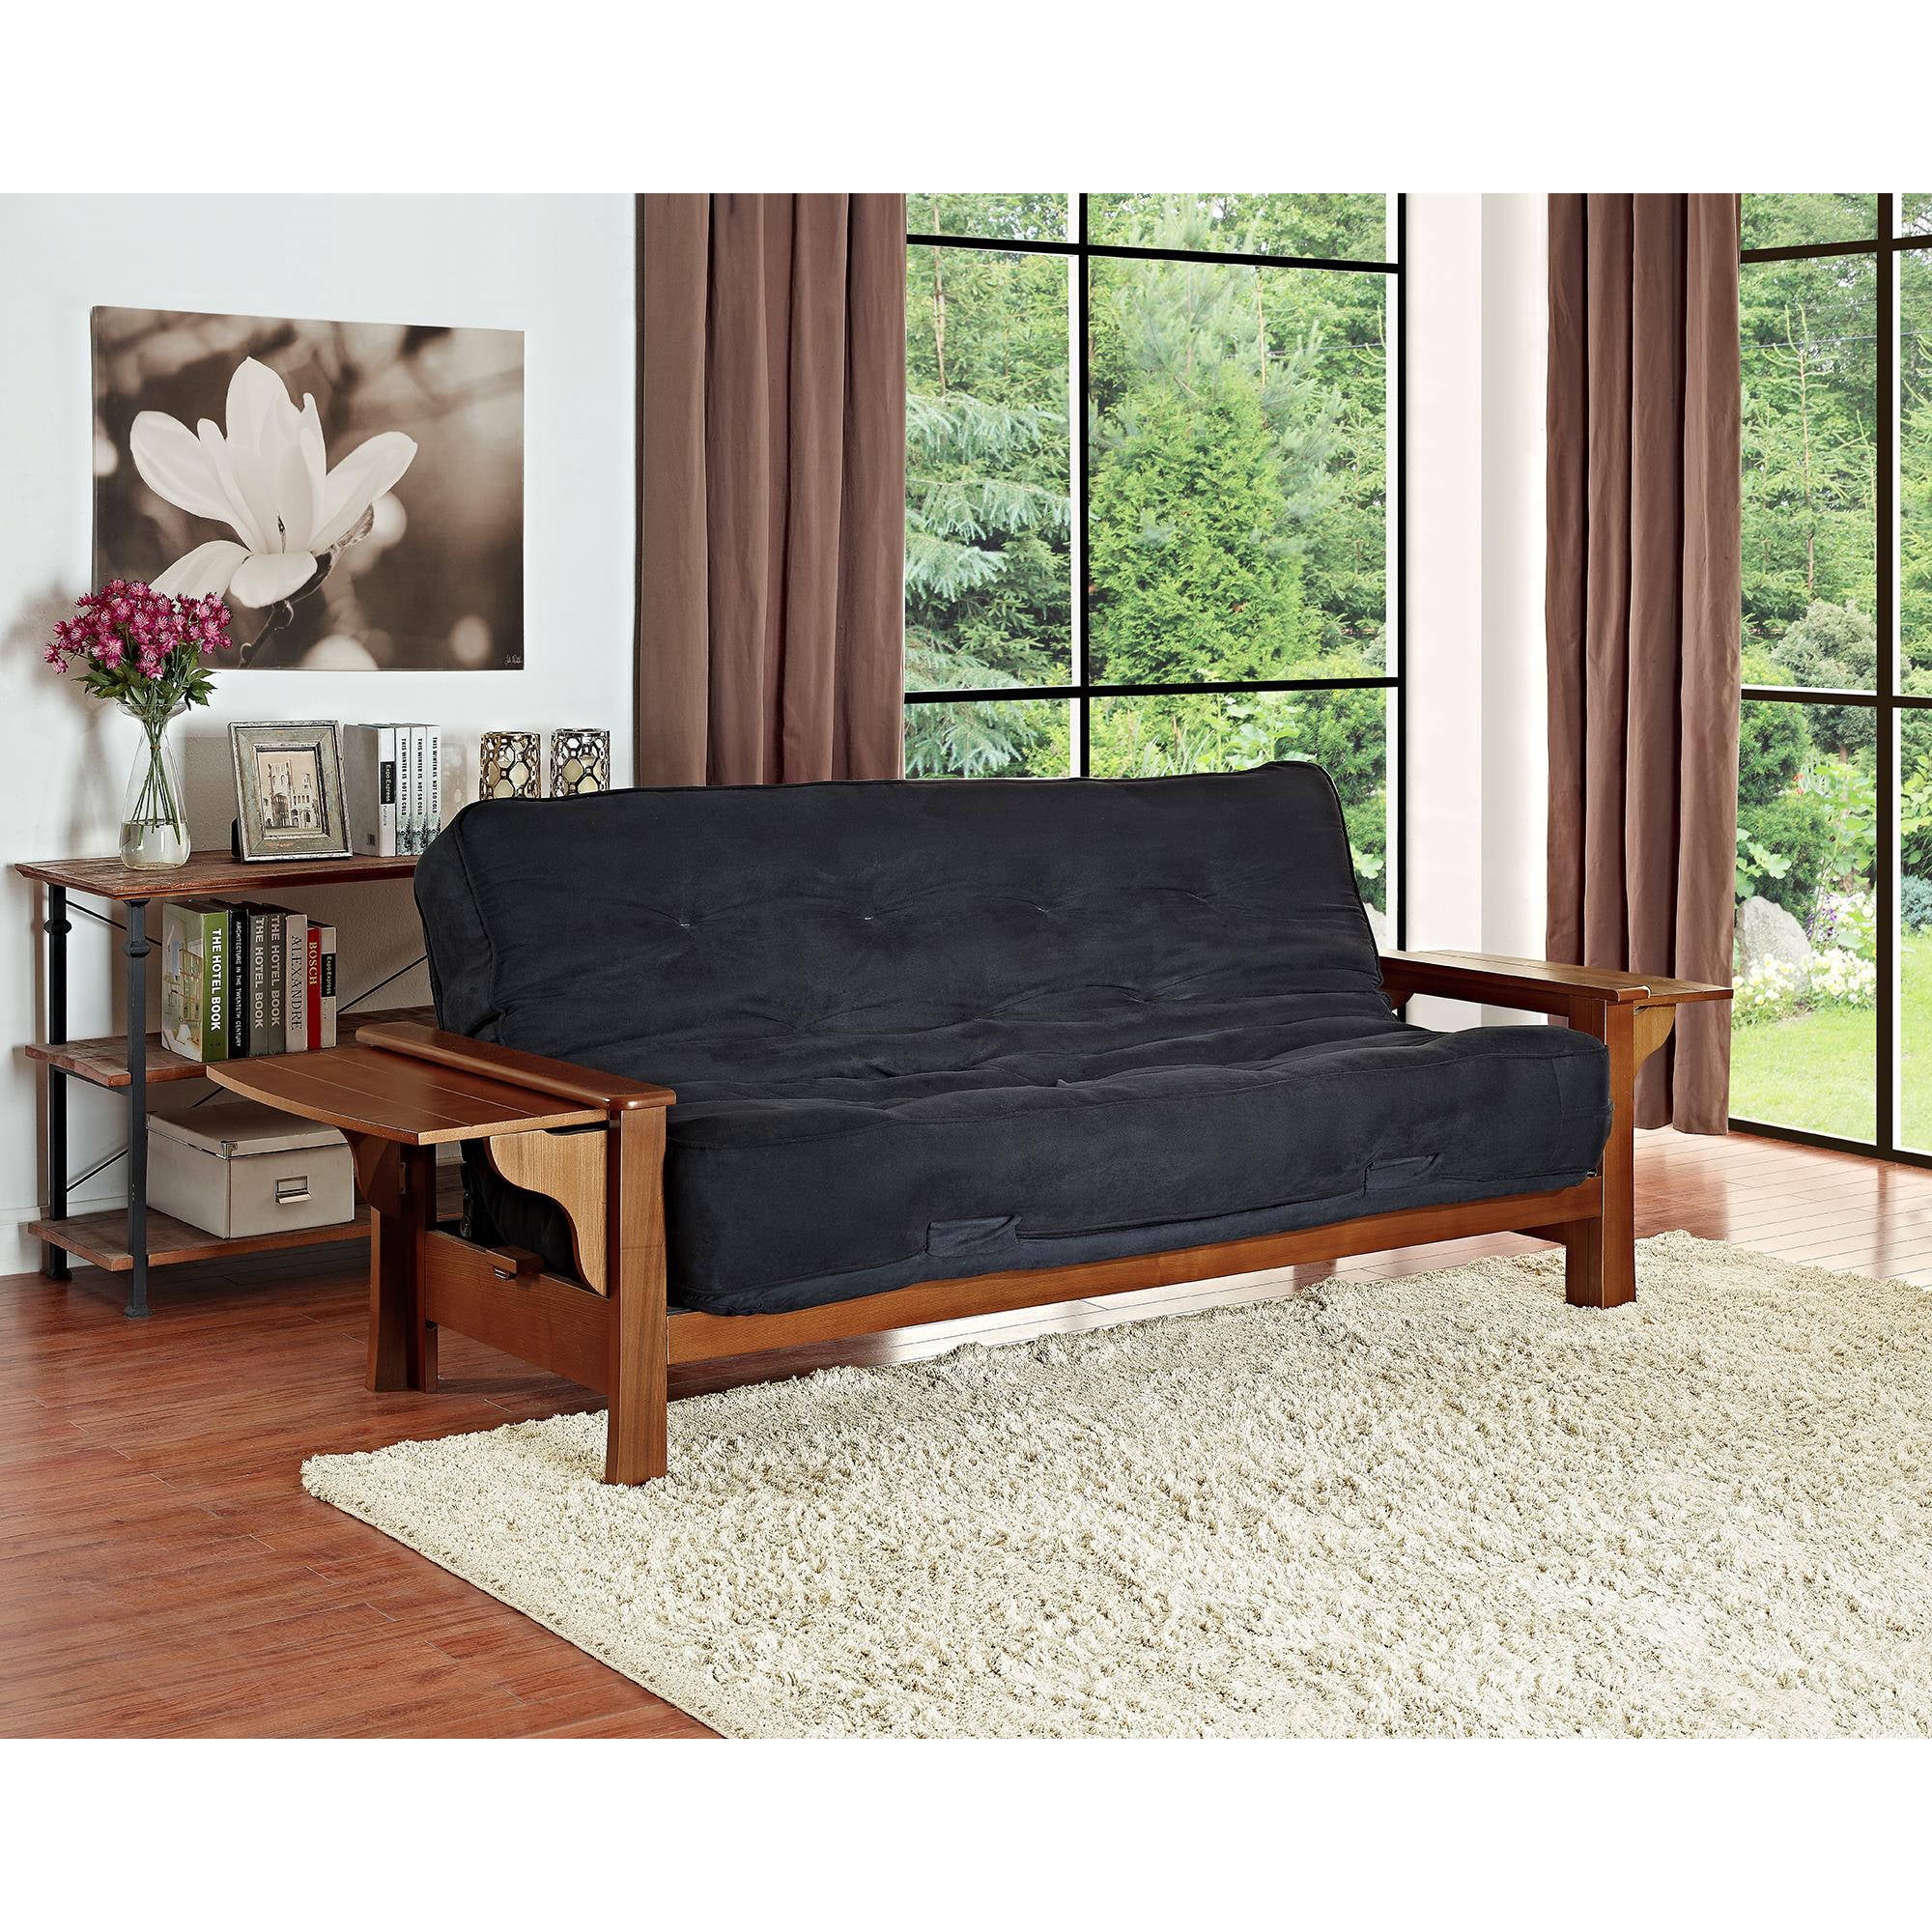 Better Homes and Gardens Neo Mission Futon Brown Walmart